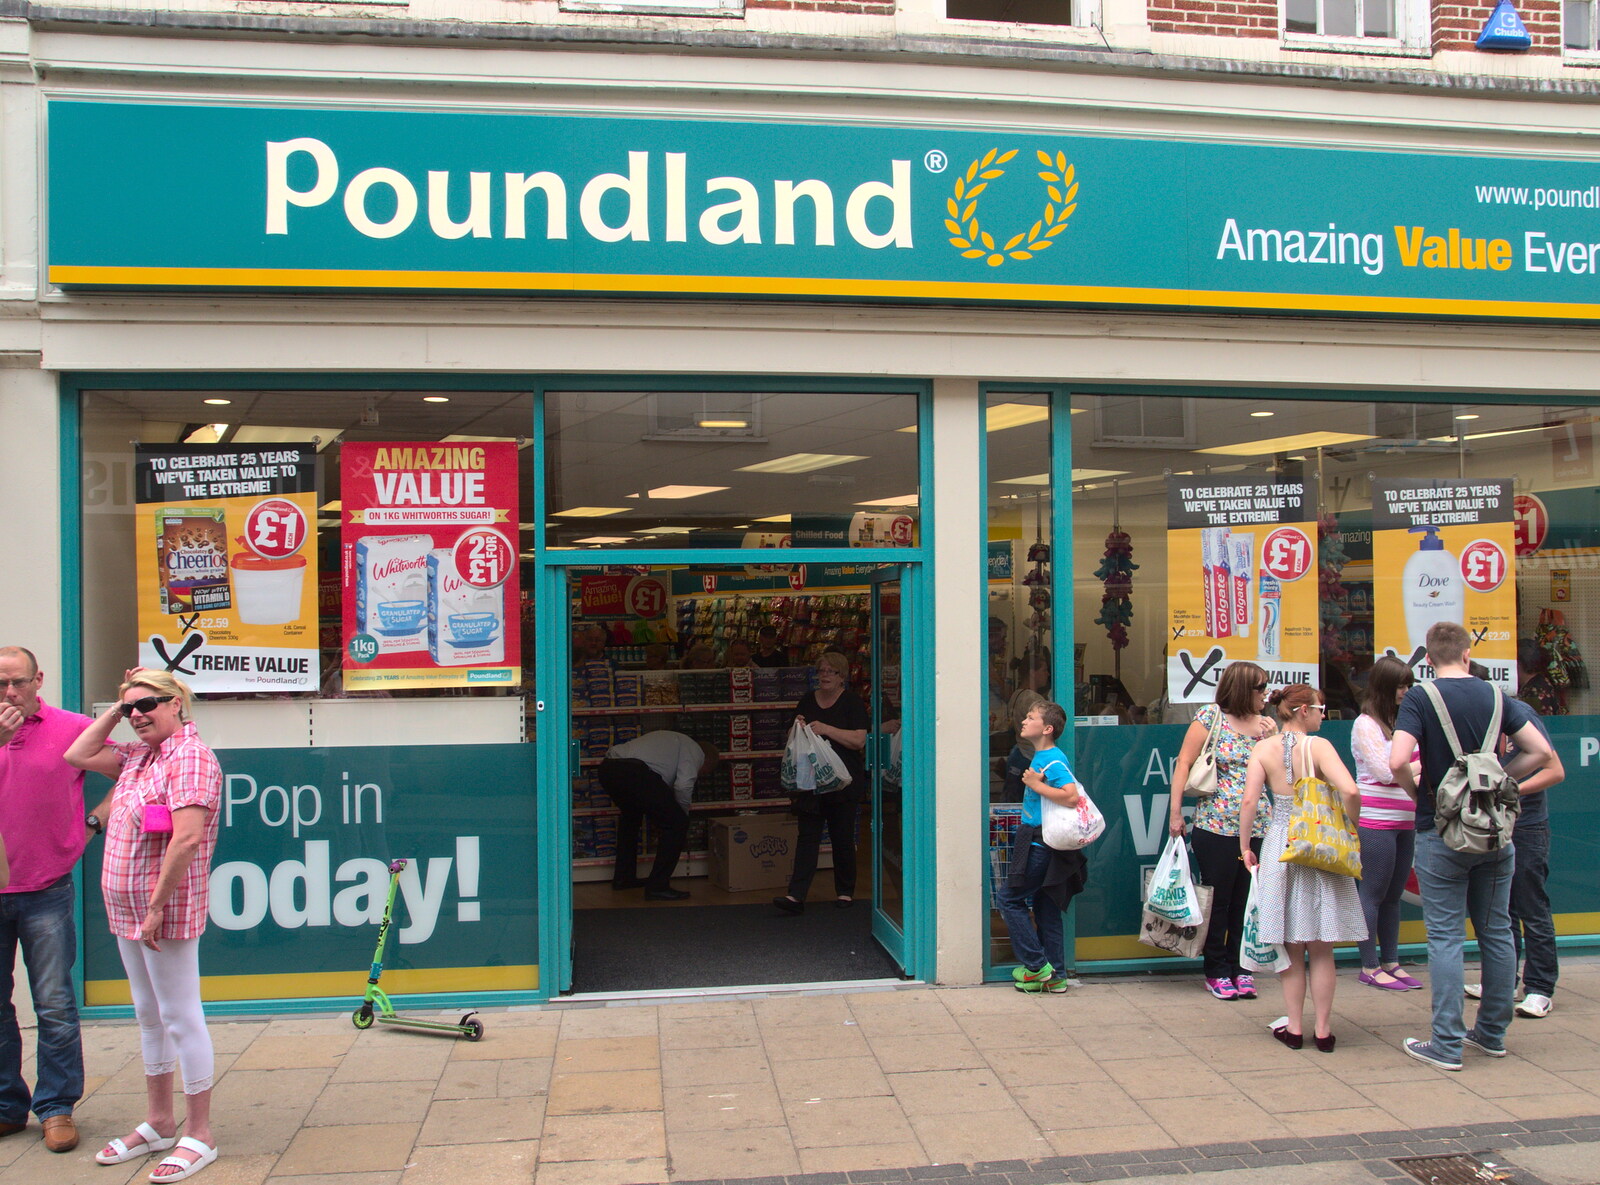 Diss goes up-market again as Poundland moves in from A visit from Da Gorls, Brome, Suffolk - 27th June 2015